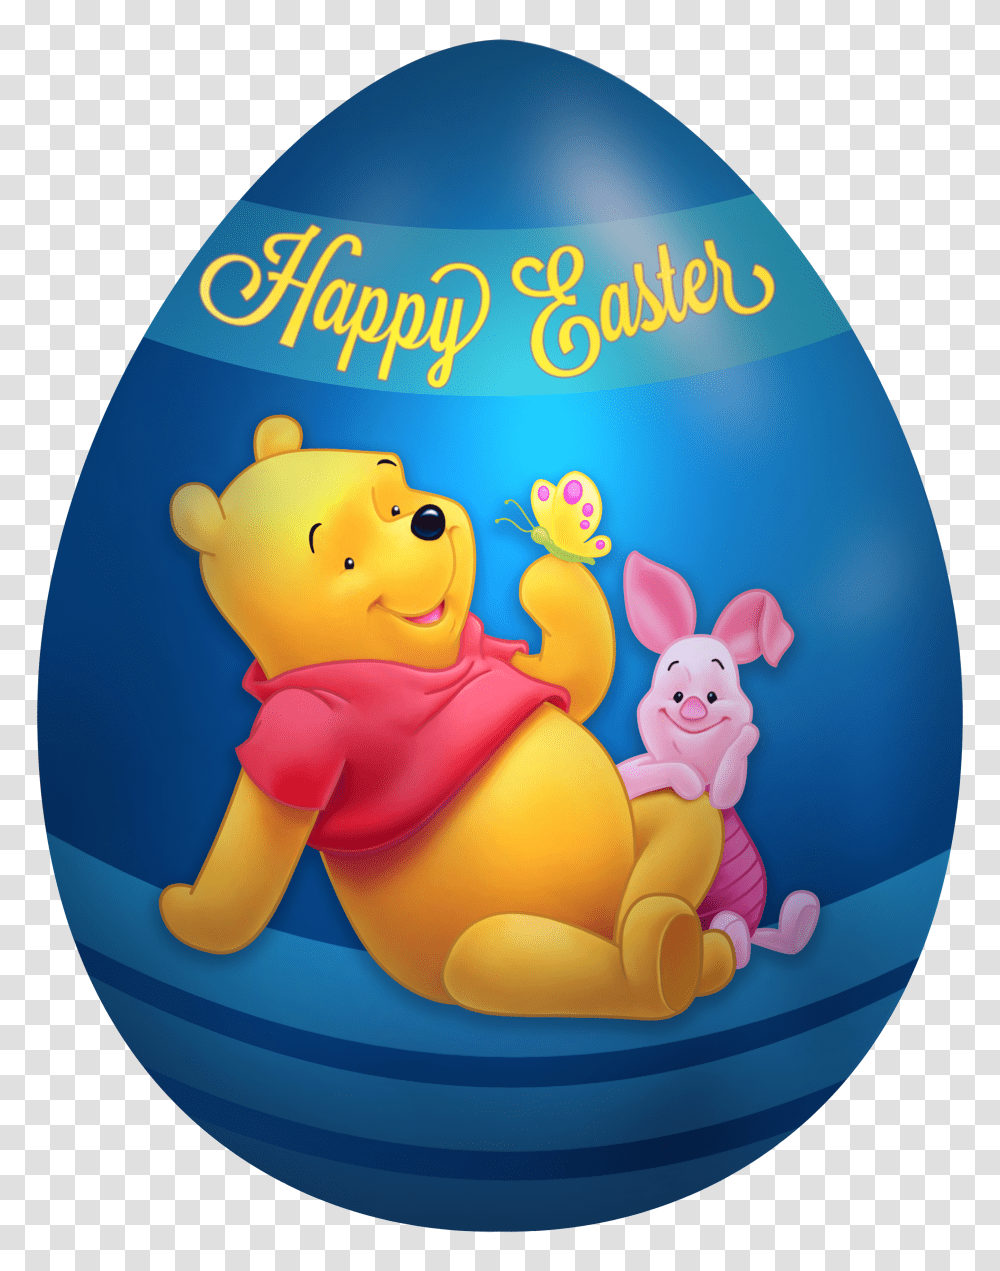 Kids Easter Egg Winnie The Pooh And Piglet Clip Art Image Transparent Png